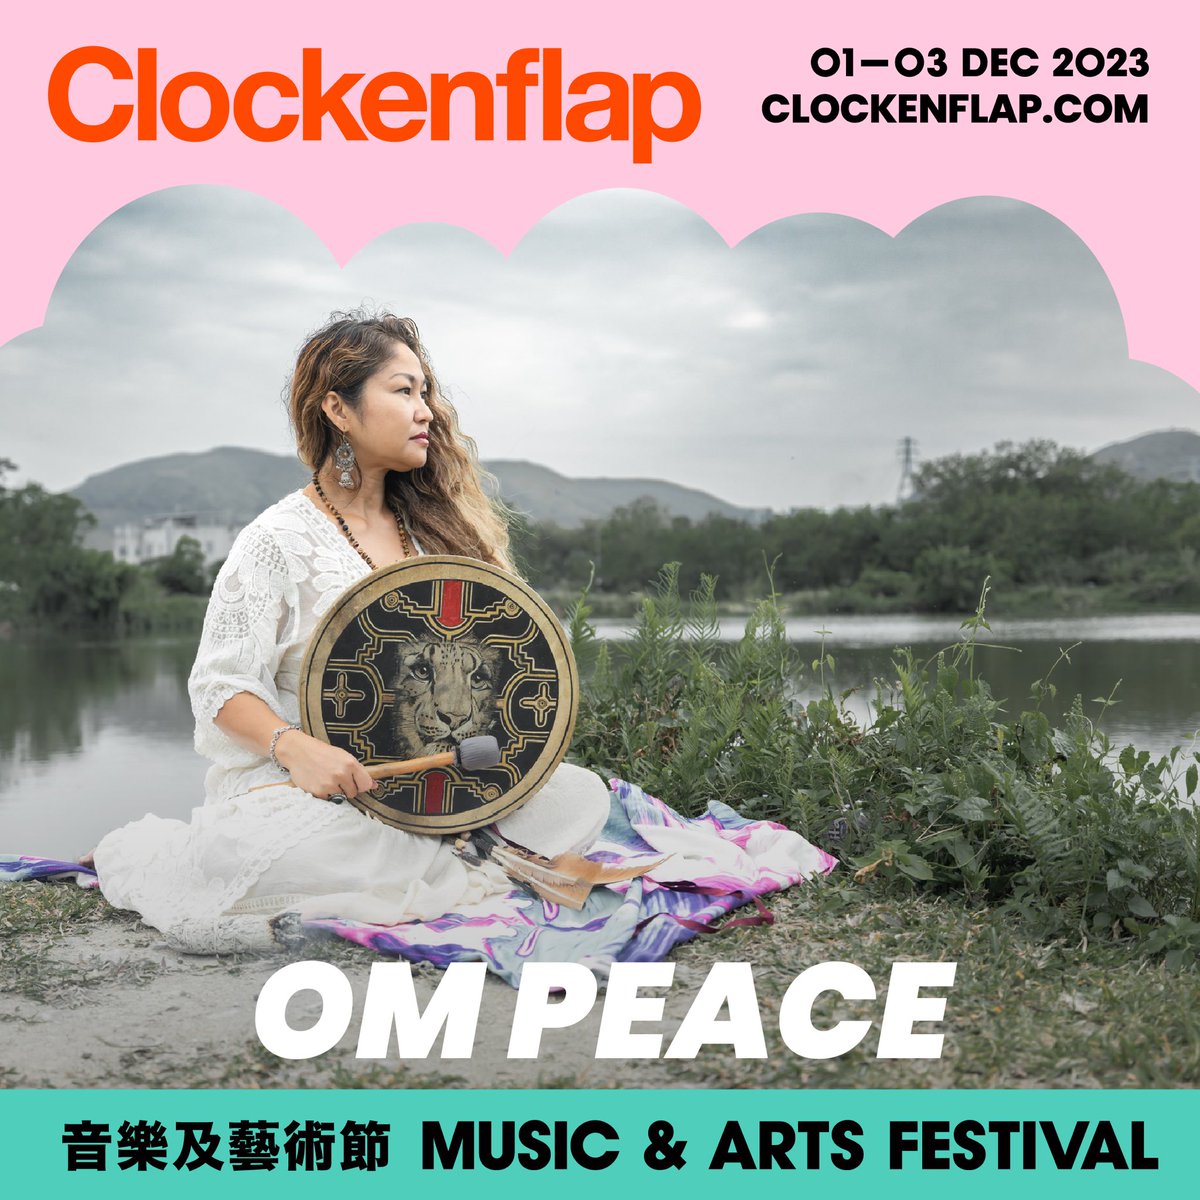 Curated by the renowned Ambikha Devi, King Plum’s Sound Emporium x Om Peace is a two-day wellness programme that gives Clockenflappers the chance to relax and recharge during the festival. Tickets: ticketflap.com/clockenflapdec…